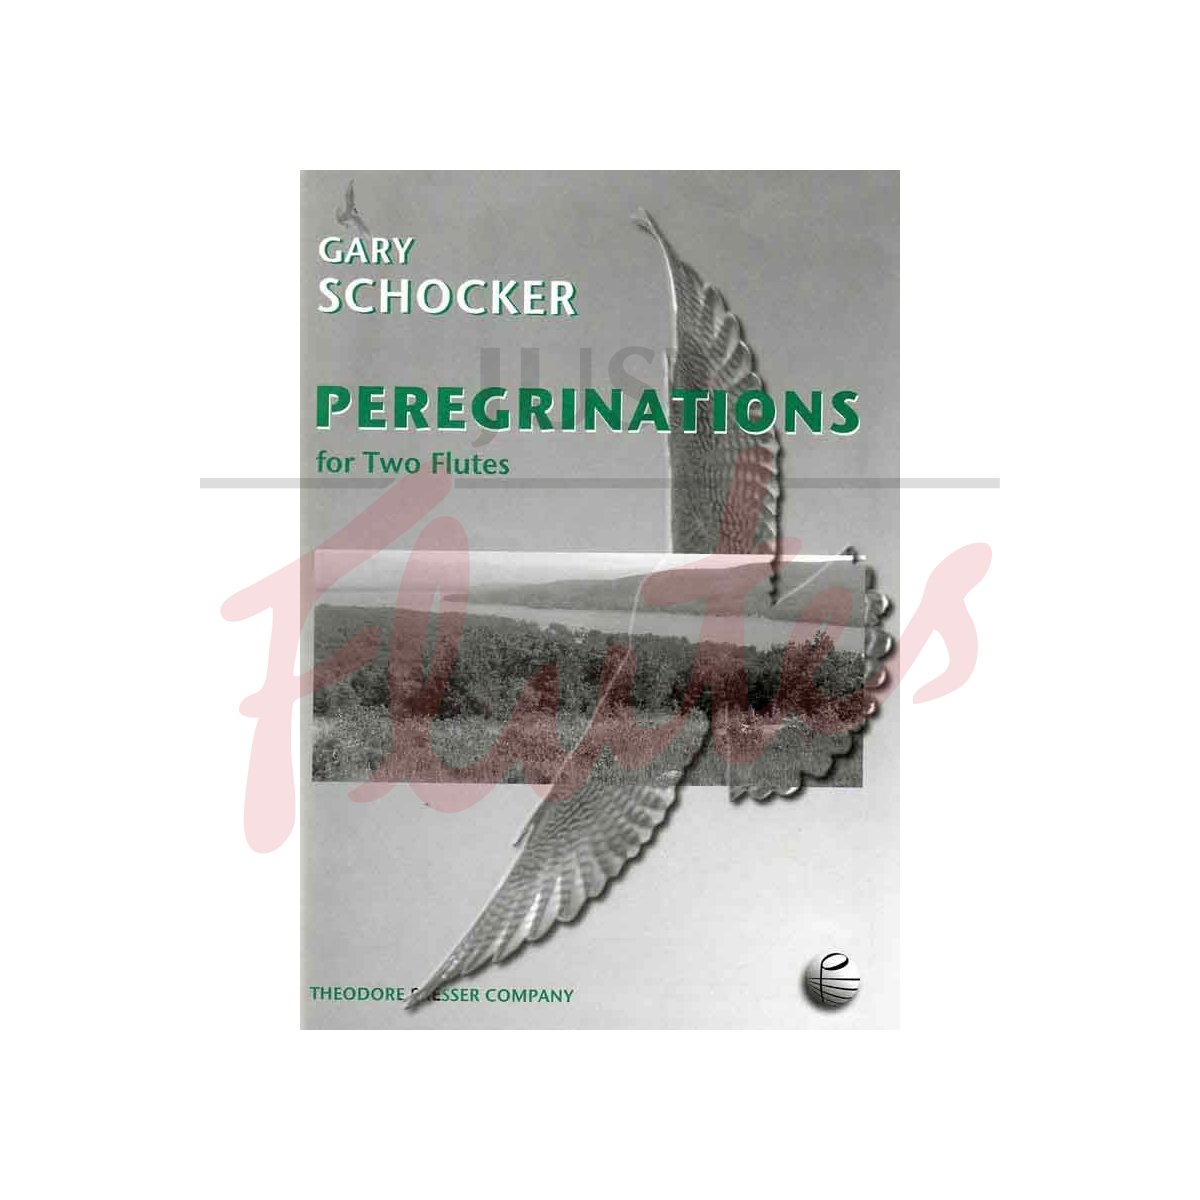 Peregrinations for Two Flutes